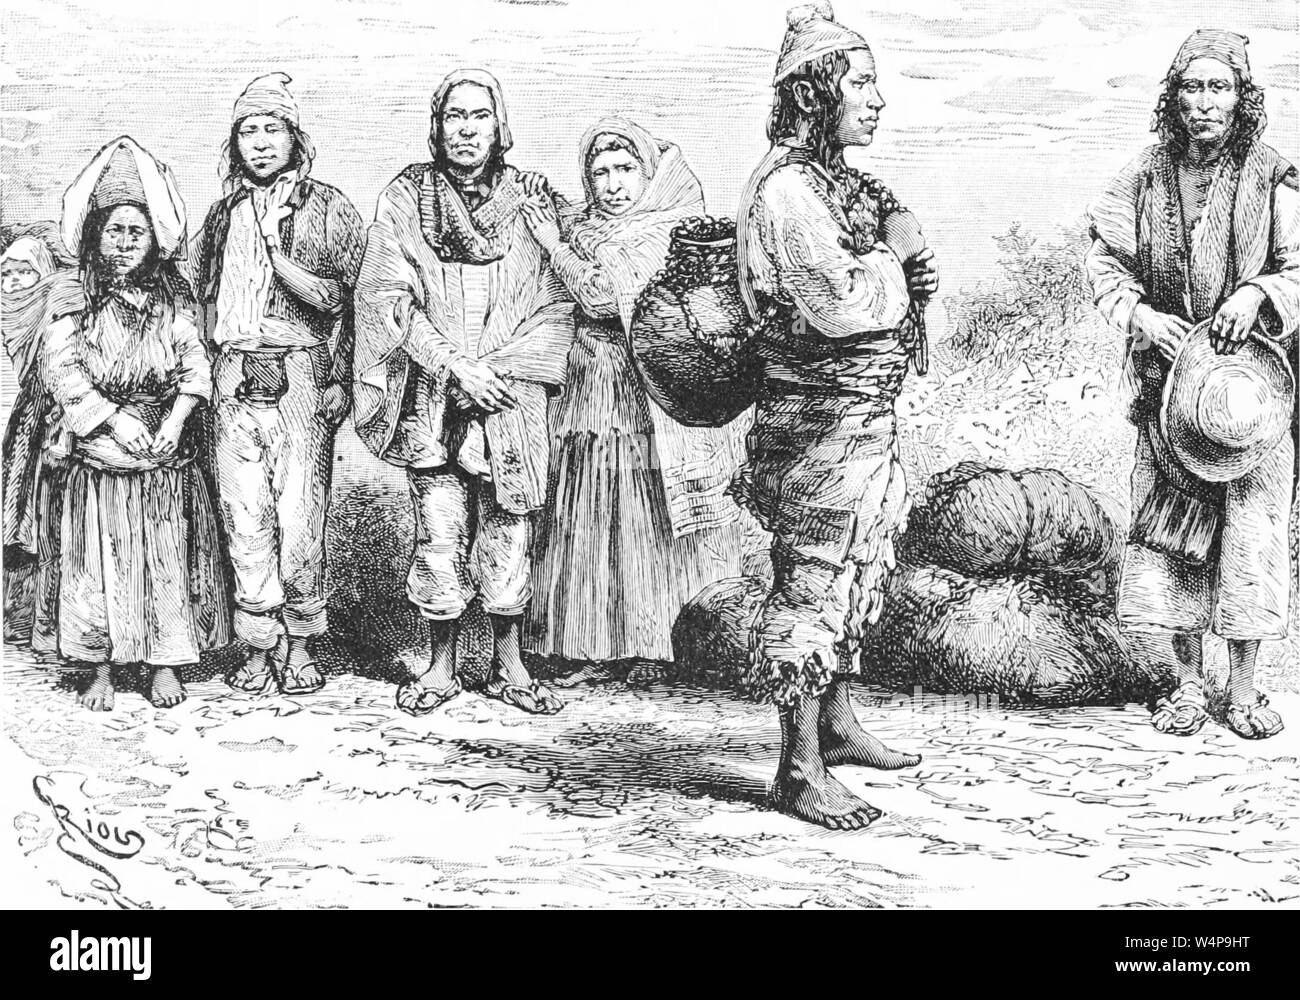 Engraved drawing of the Aymara and Quichua tribe people, from the book 'Ridpath's Universal history' by John Clark Ridpath, 1897. Courtesy Internet Archive. () Stock Photo